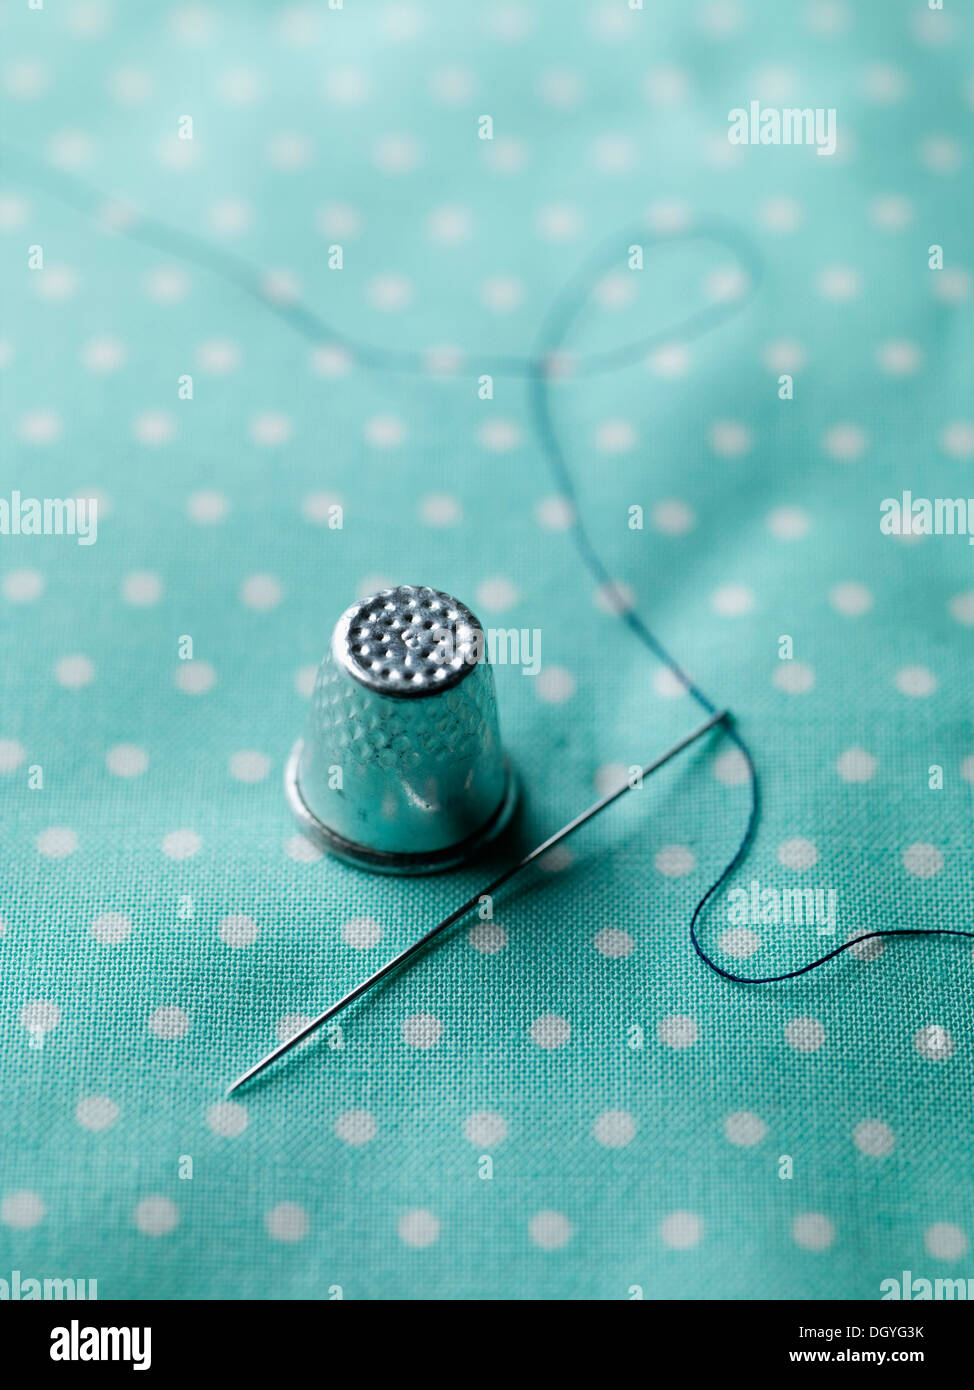 A threaded needle and thimble on top of polka dotted fabric Stock Photo